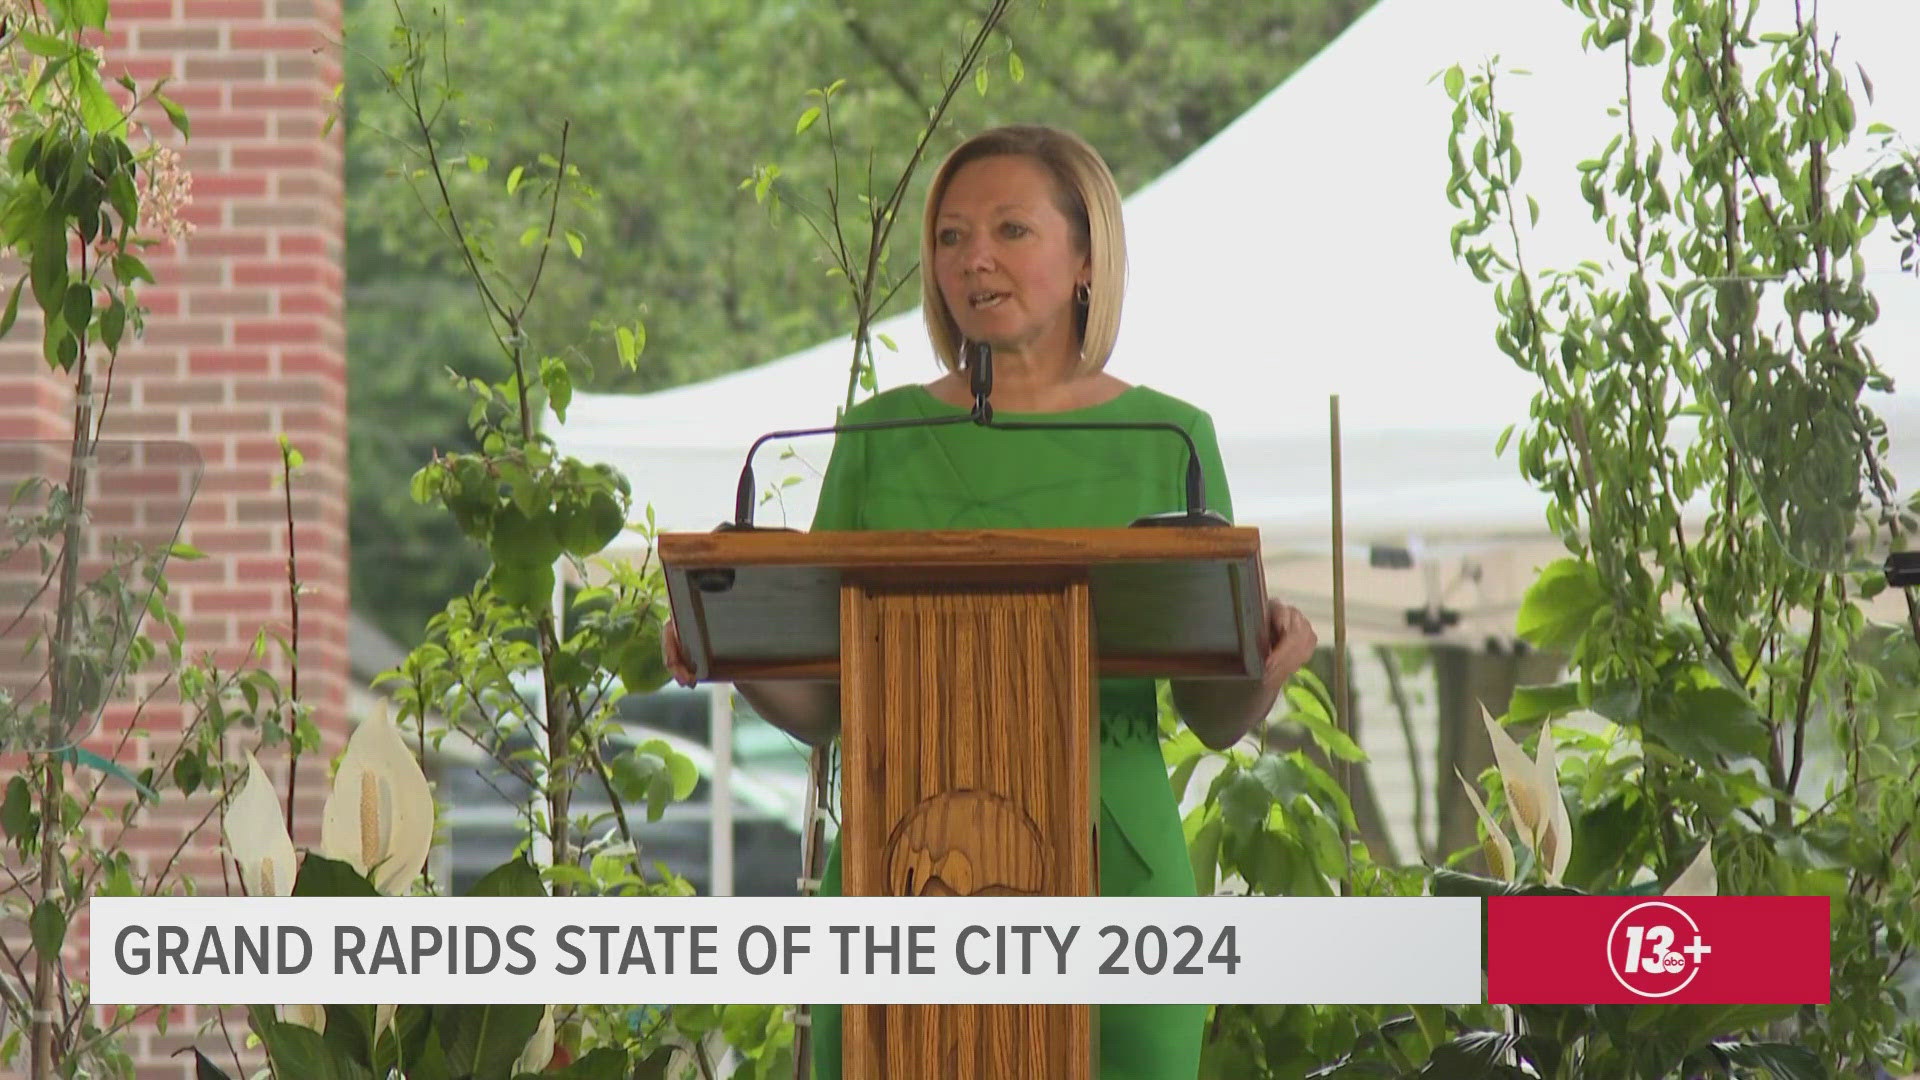 Grand Rapids Mayor Rosalynn Bliss delivered her ninth and final State of the City address Thursday night.